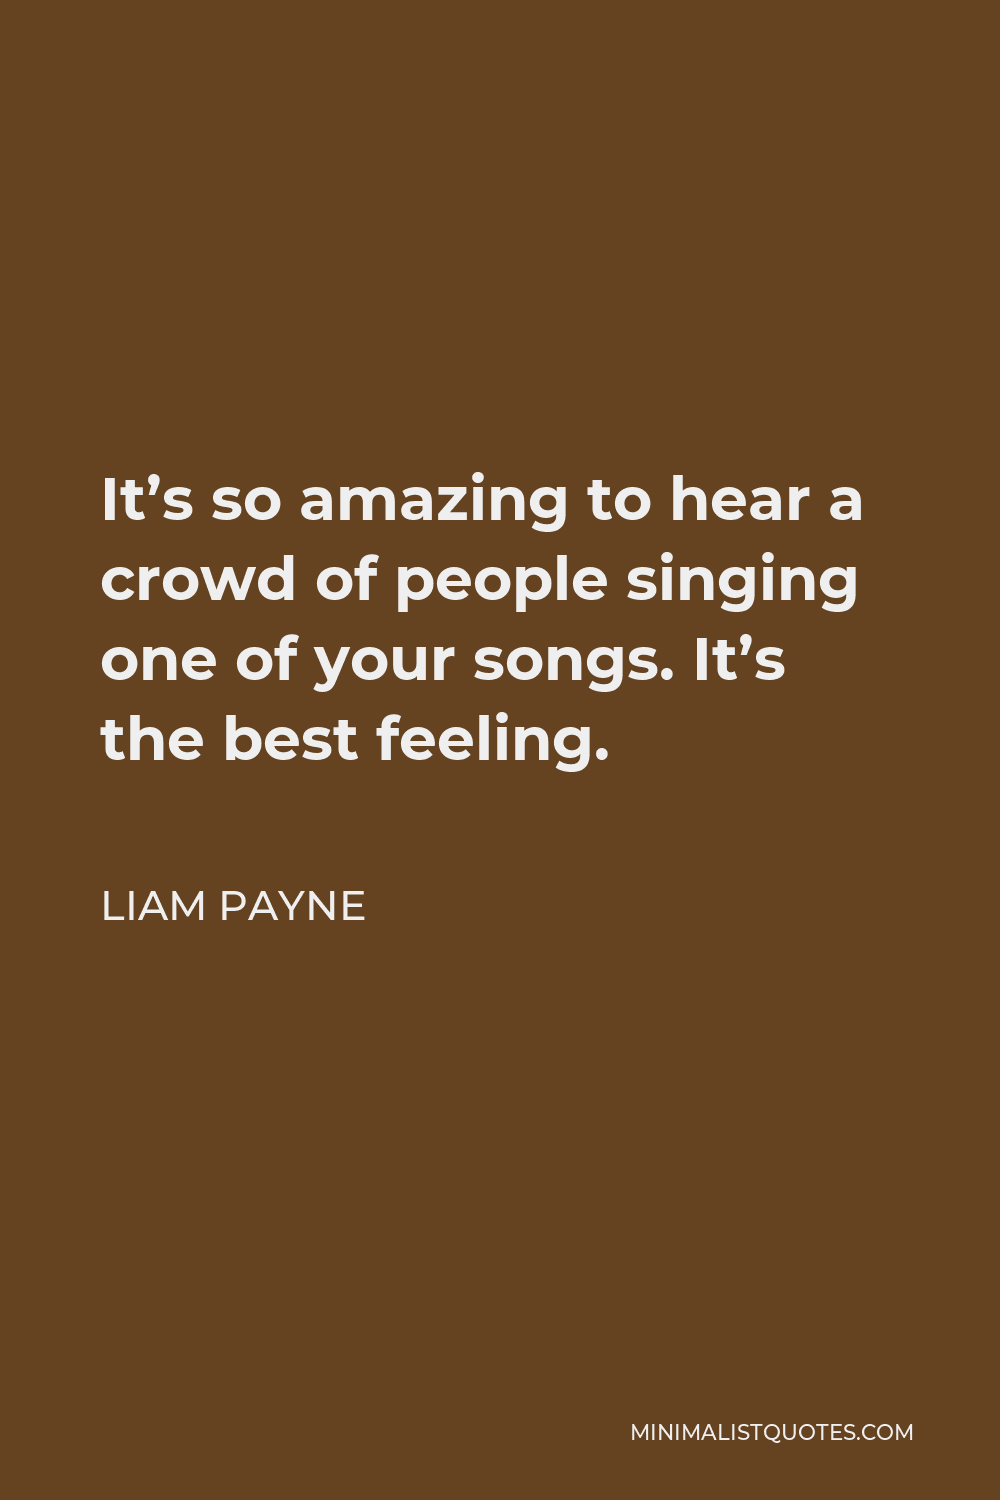 Liam Payne Quote - It’s so amazing to hear a crowd of people singing one of your songs. It’s the best feeling.